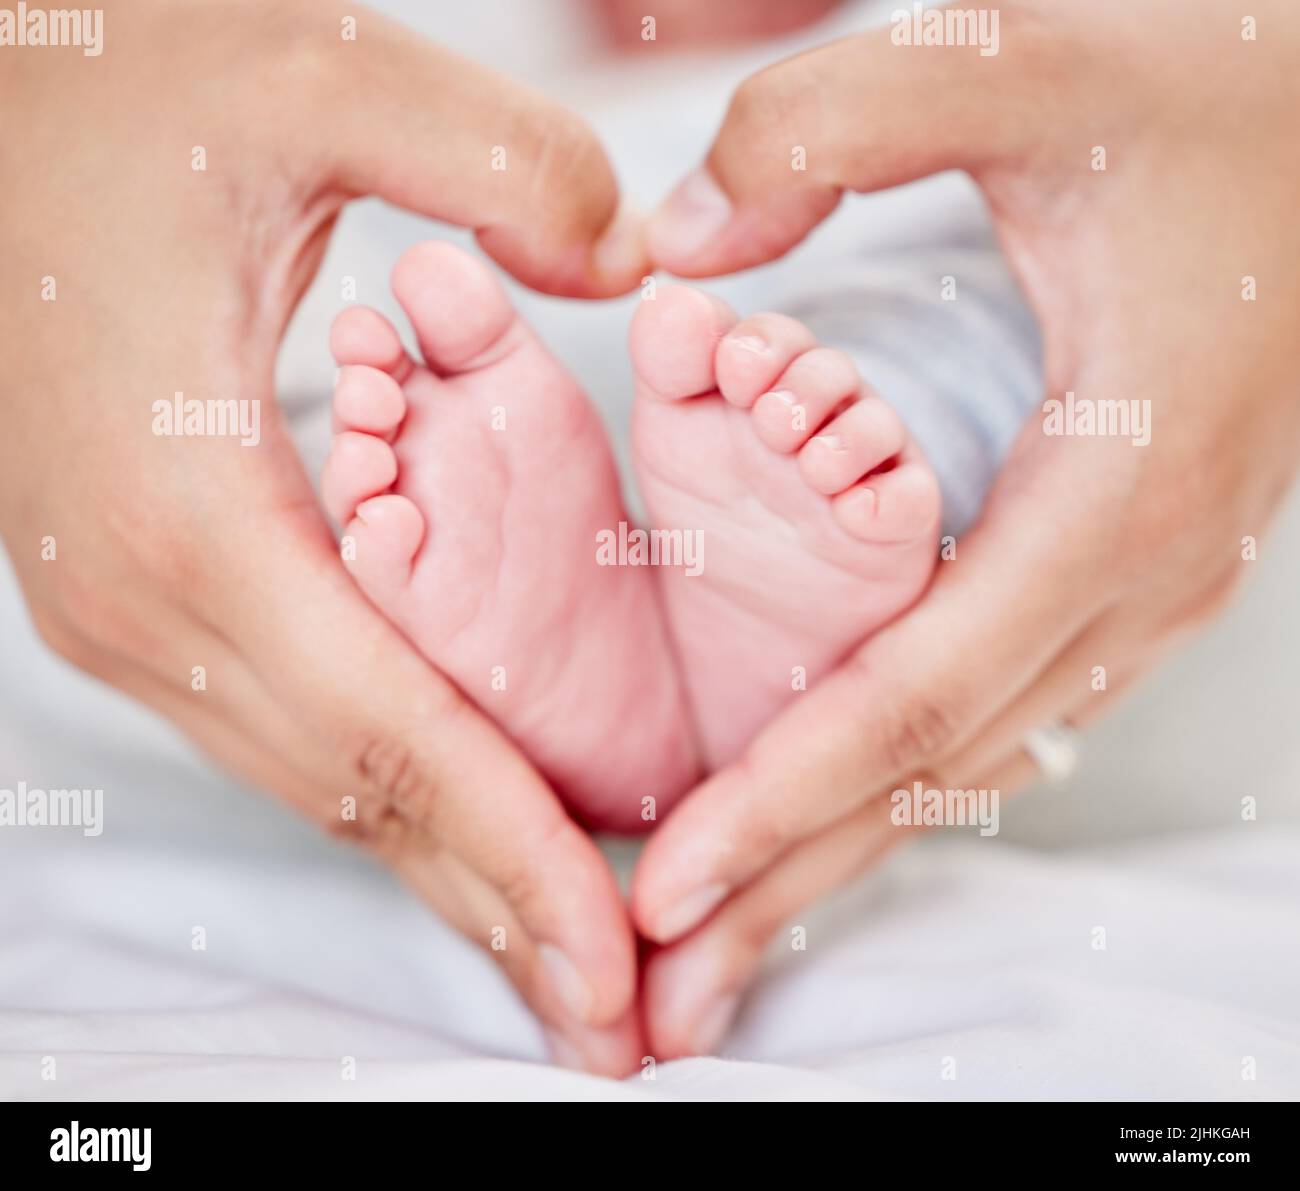 Closeup of hands of a parent forming a heart shape around tiny newborn baby feet. Mother loving her little baby. Small baby resting in its nursery Stock Photo